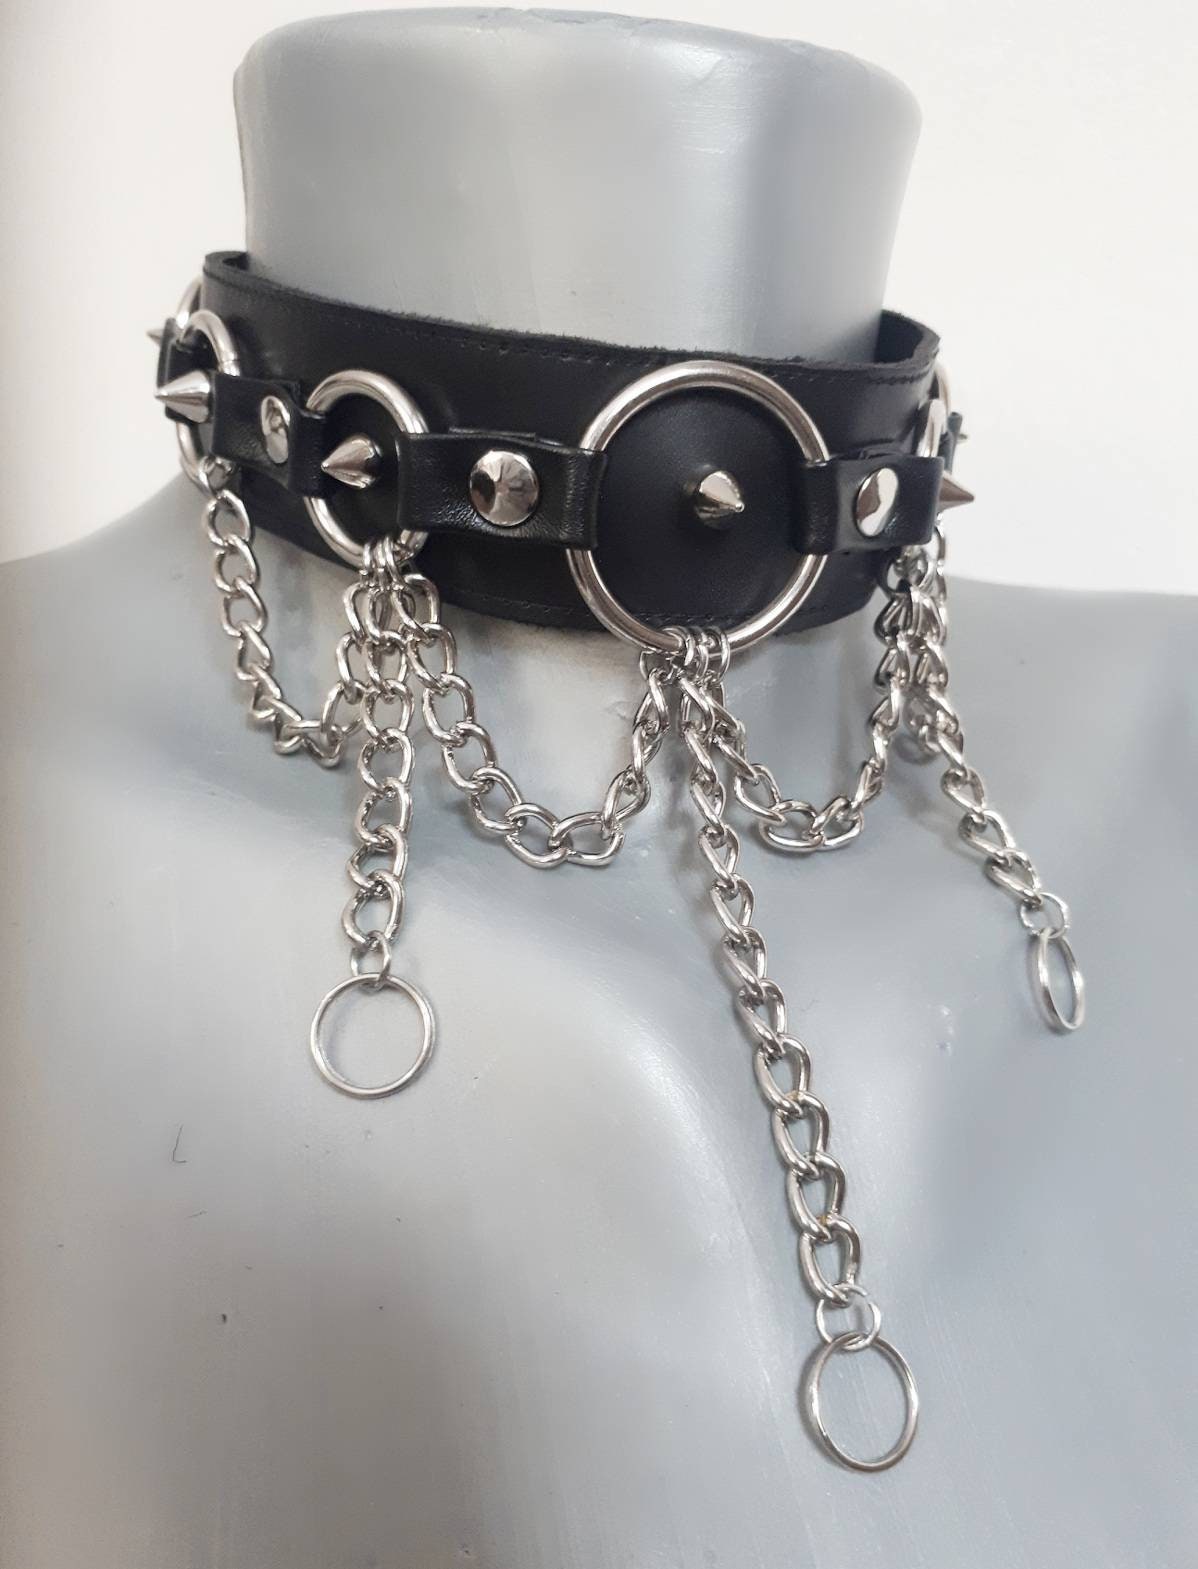 Gothic punk rock choker with rings | Etsy